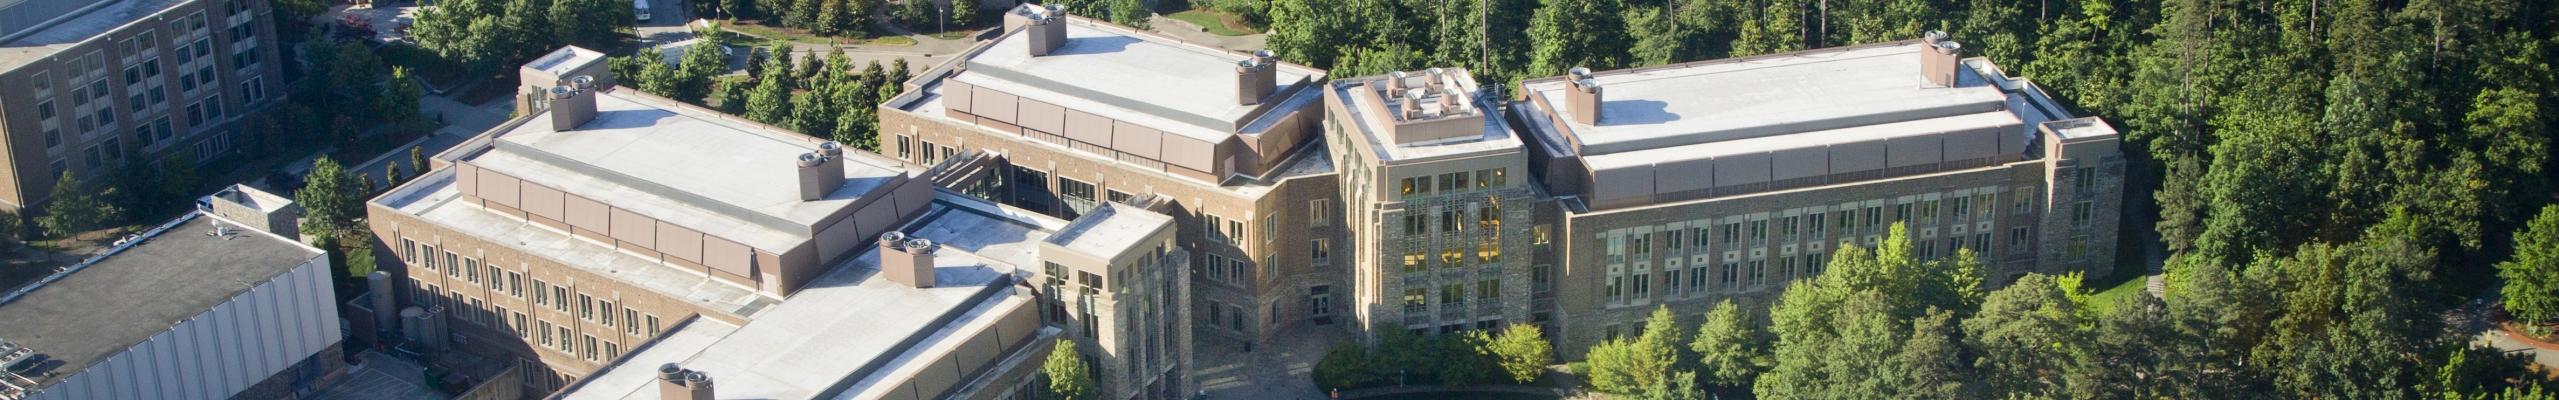 aerial view of the Fitzpatrick Center